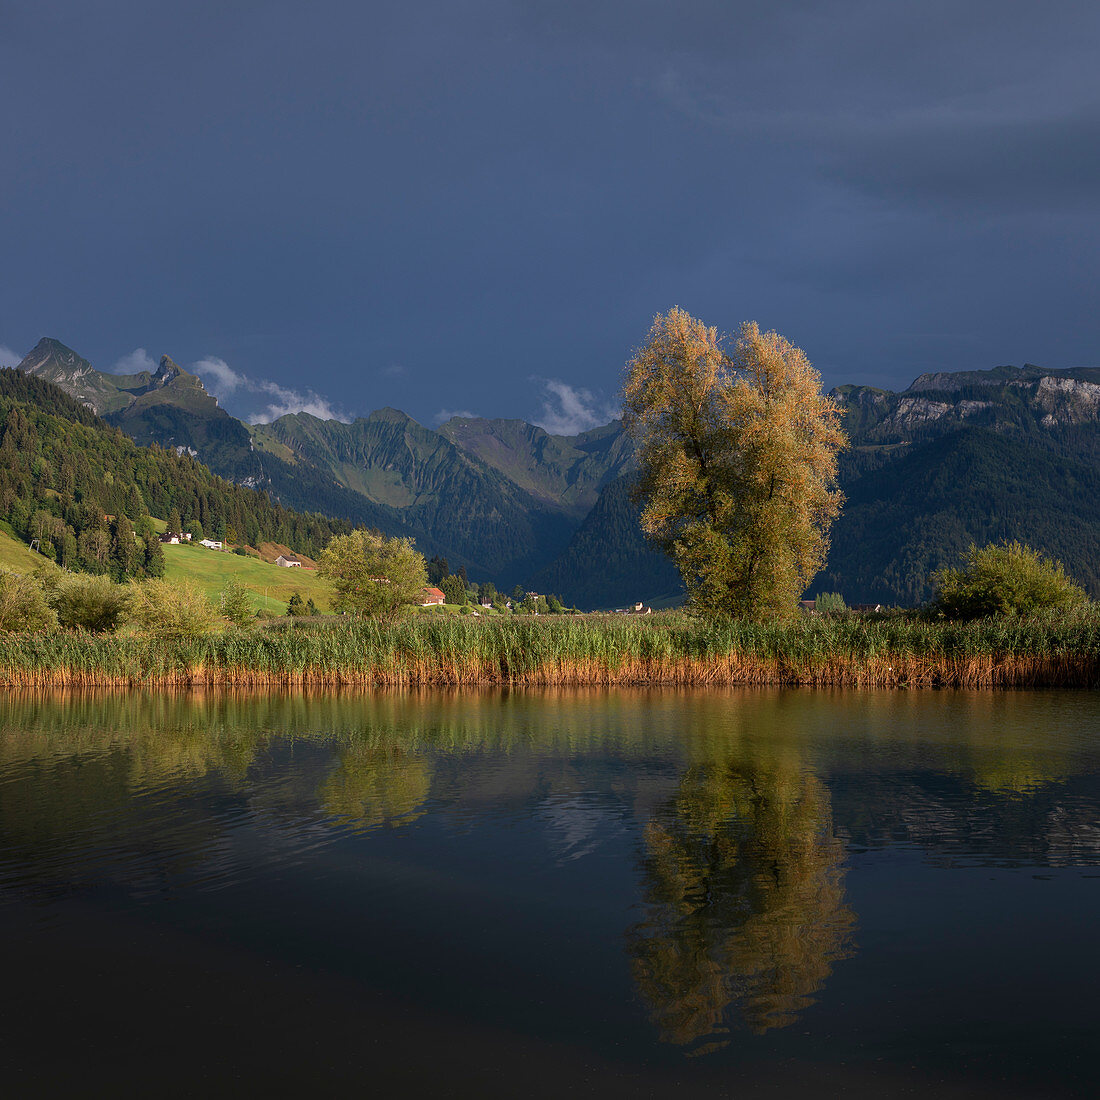 Tree on Sihlsee with reeds and mountains, Einsiedeln Switzerland